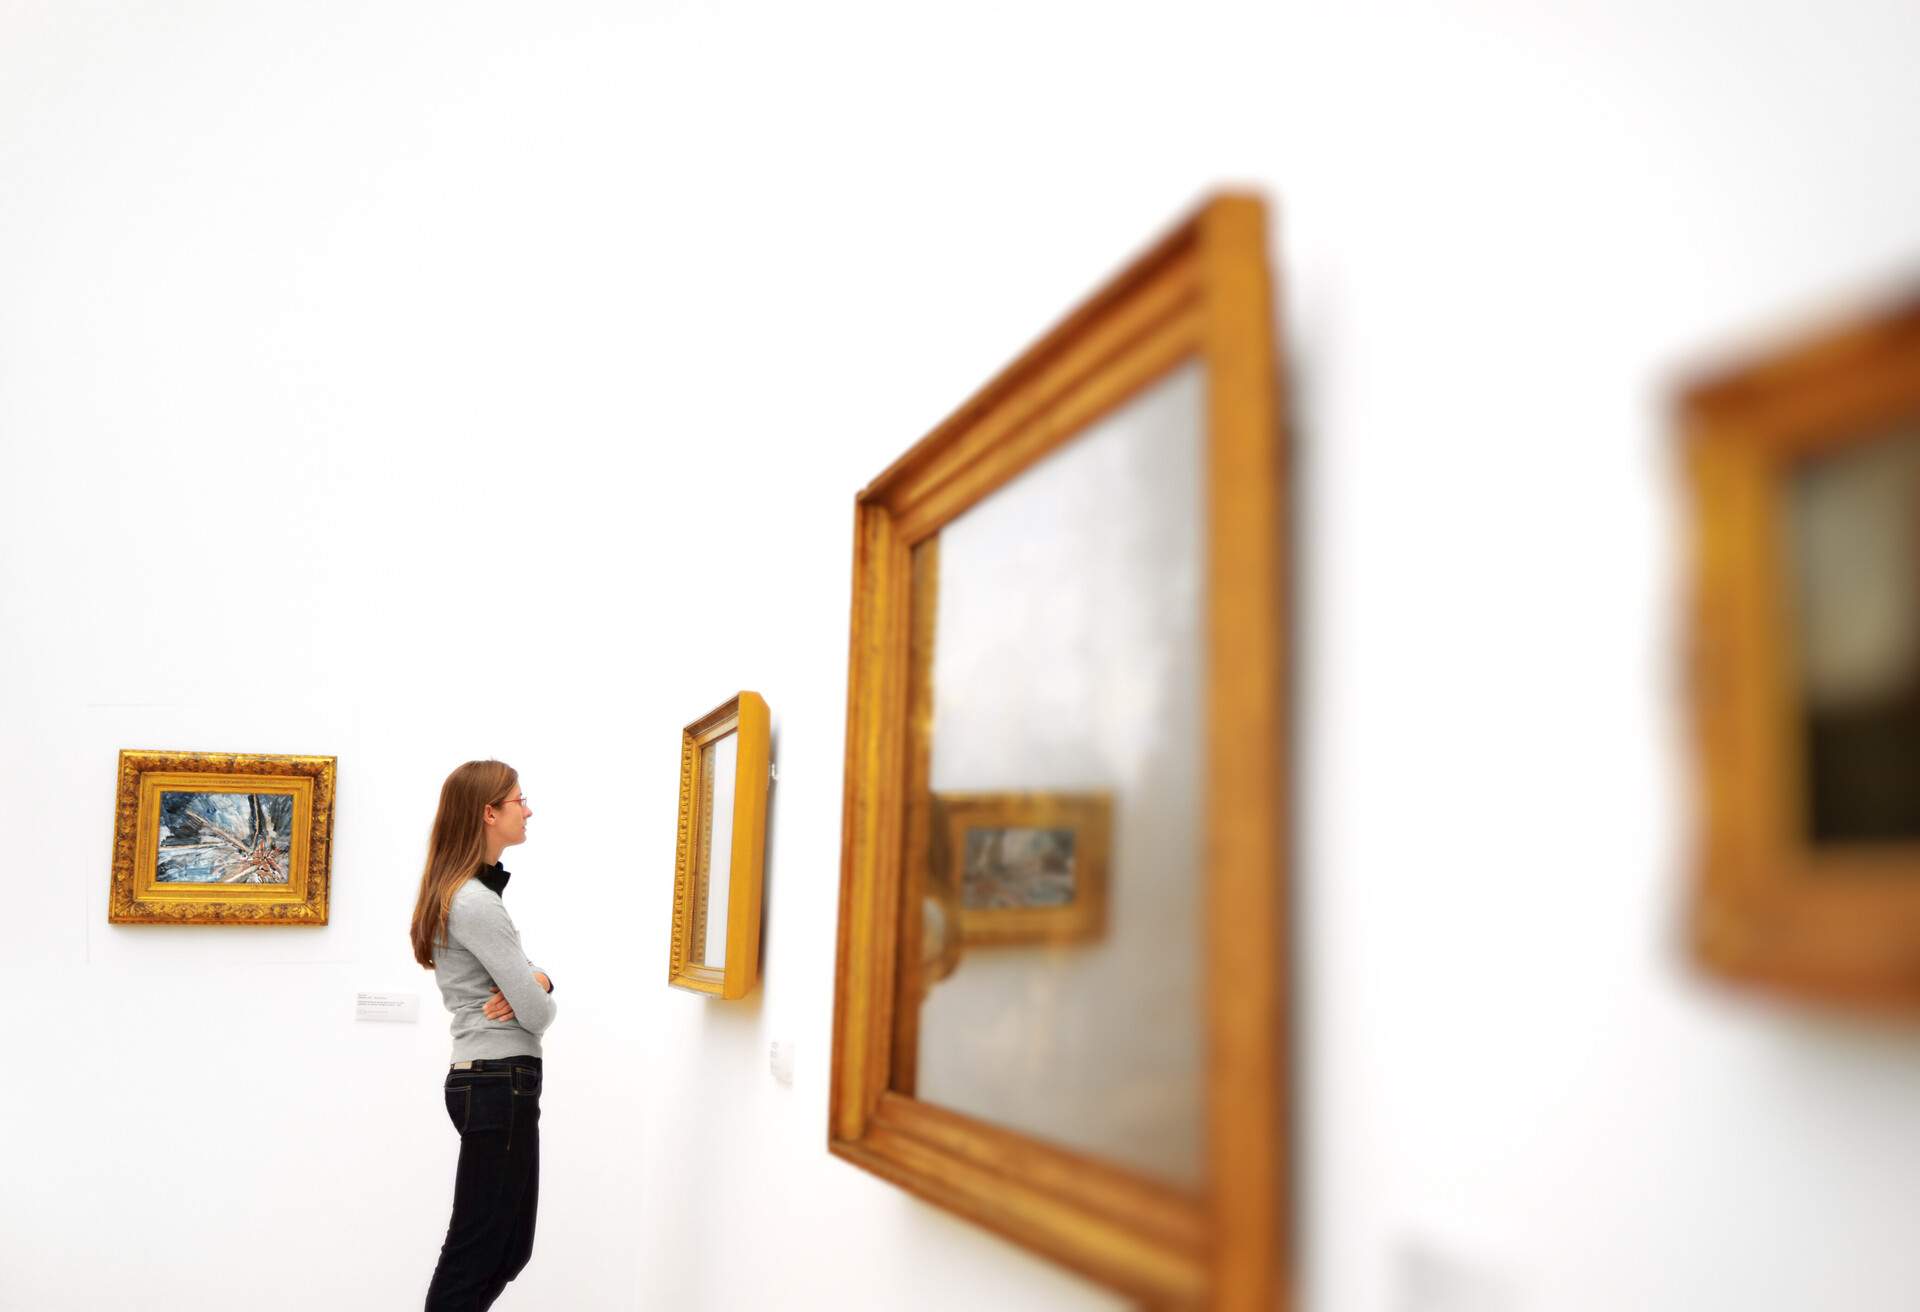 A young woman standing with arms folded over her chest admiring wooden framed wall art.